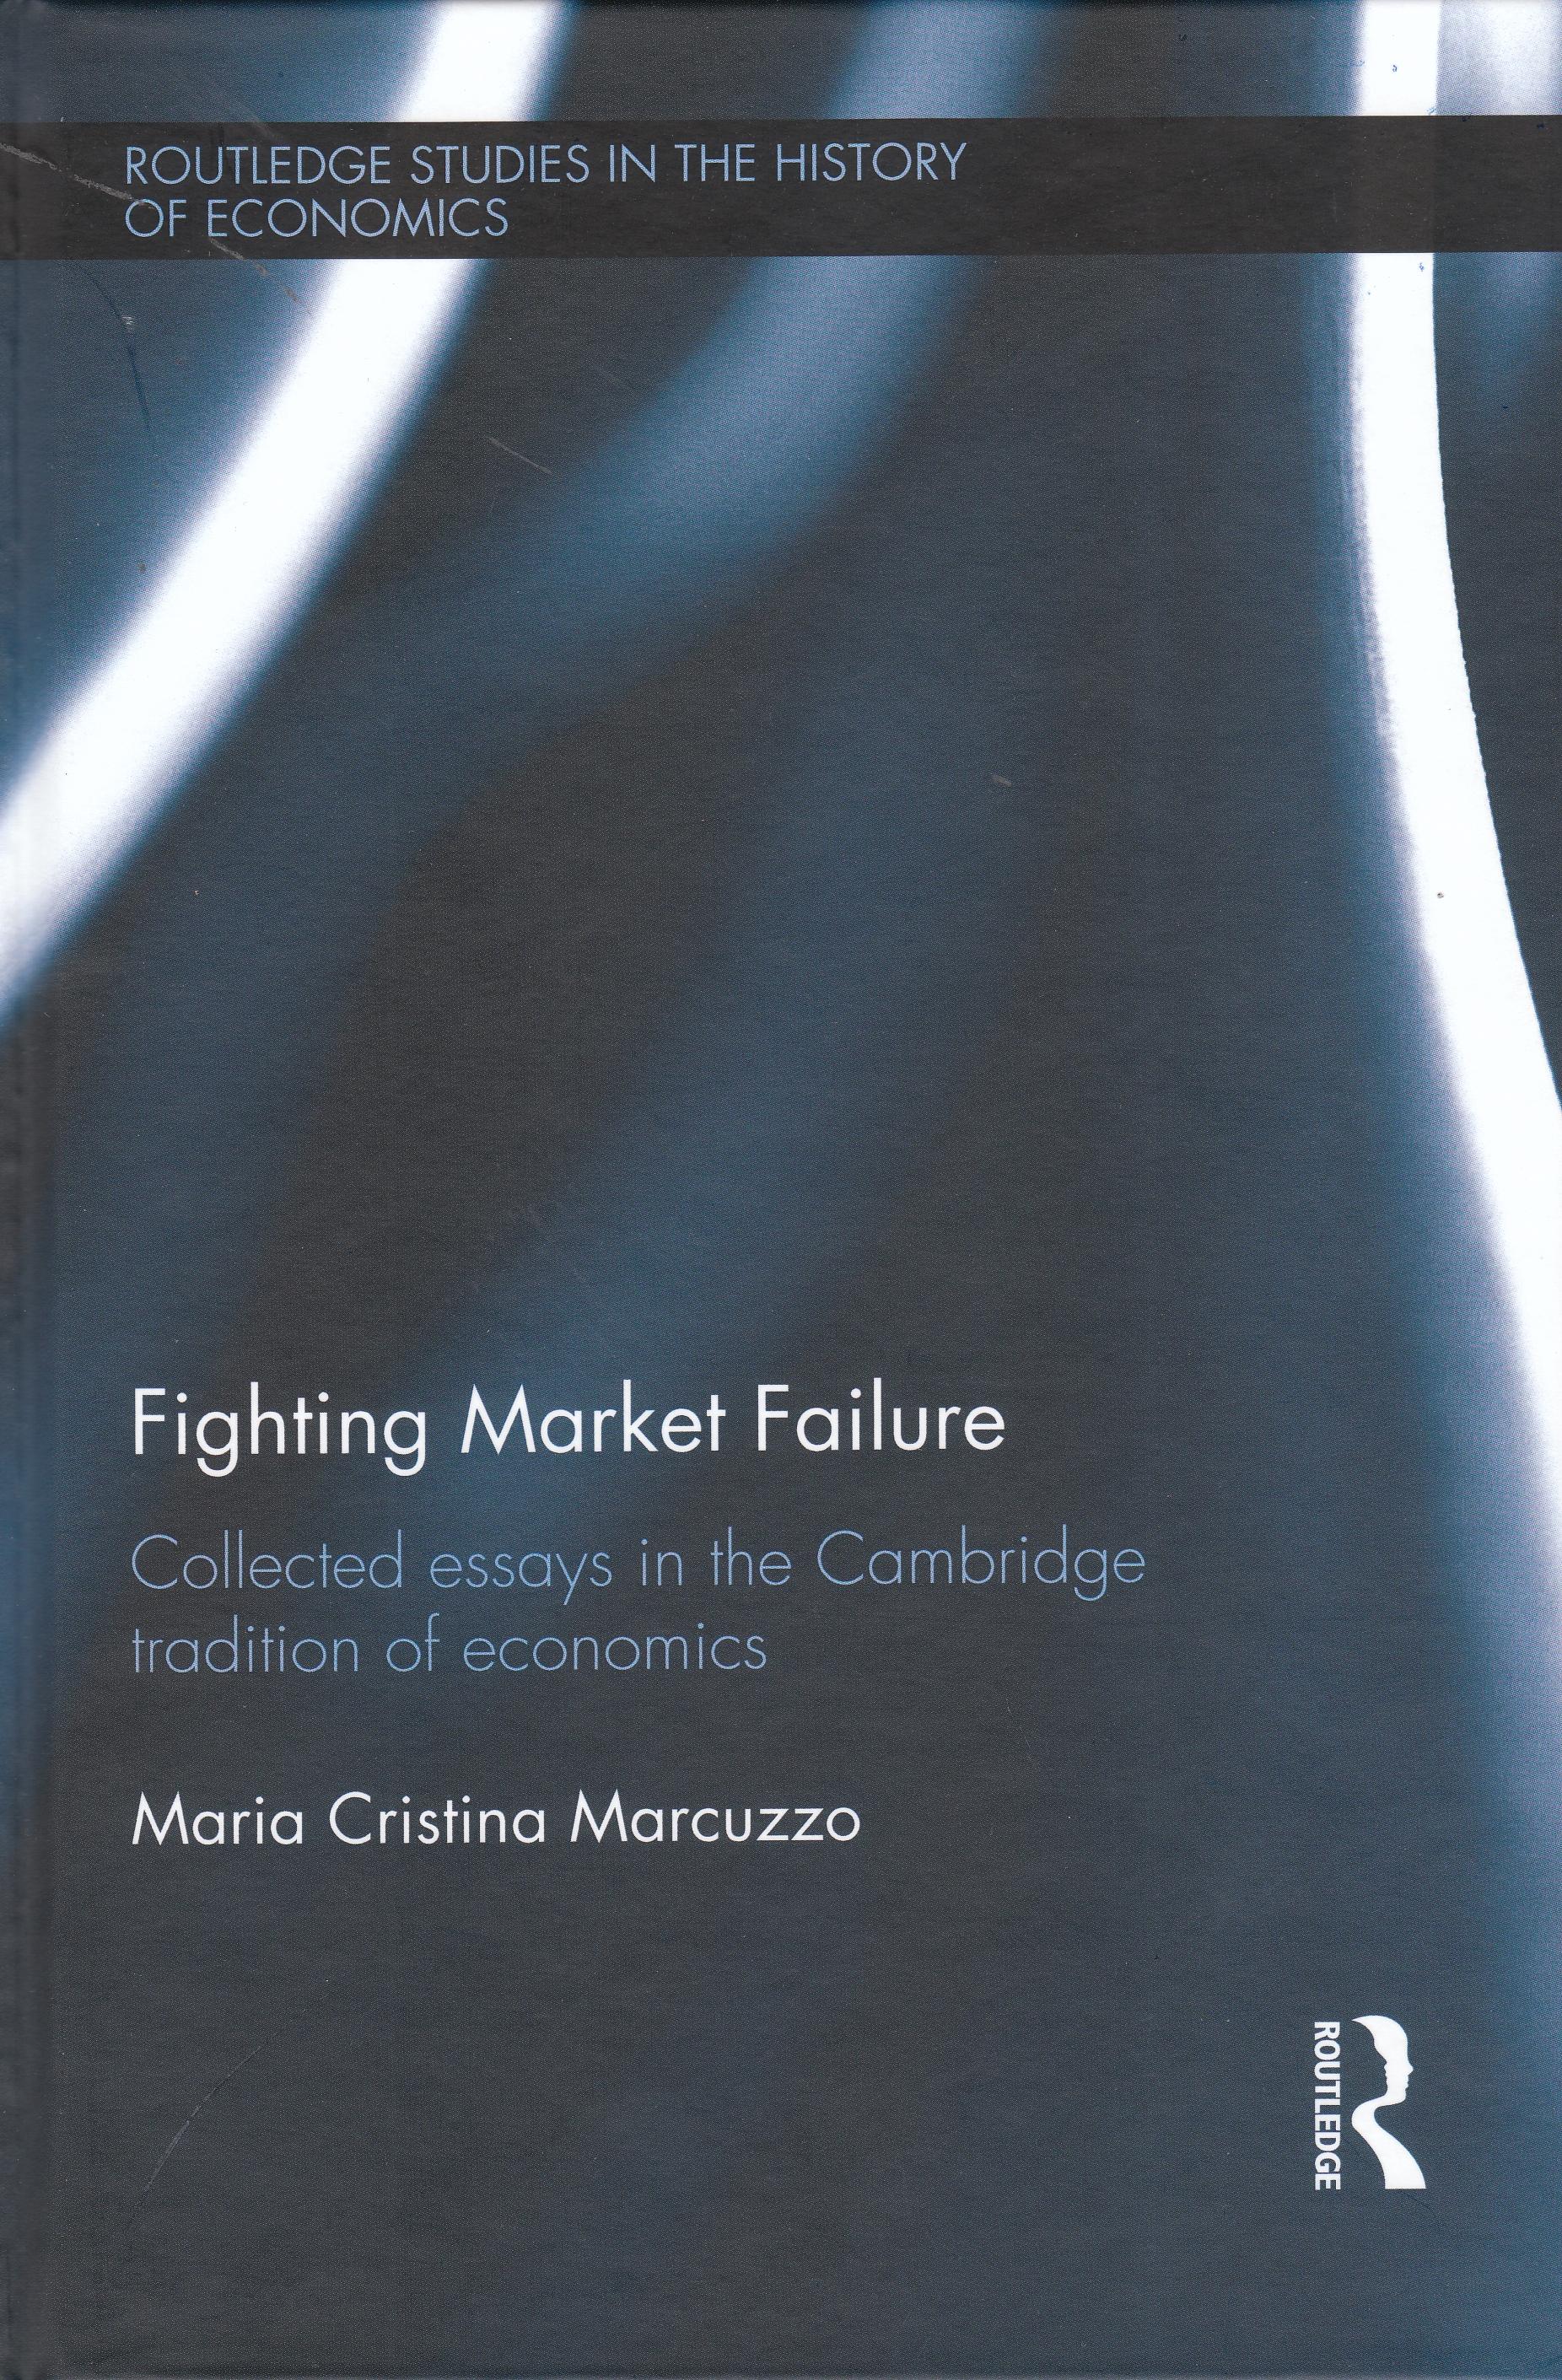 Fighting Market Failure "Collected Essays in the Cambridge Tradition of Economics"